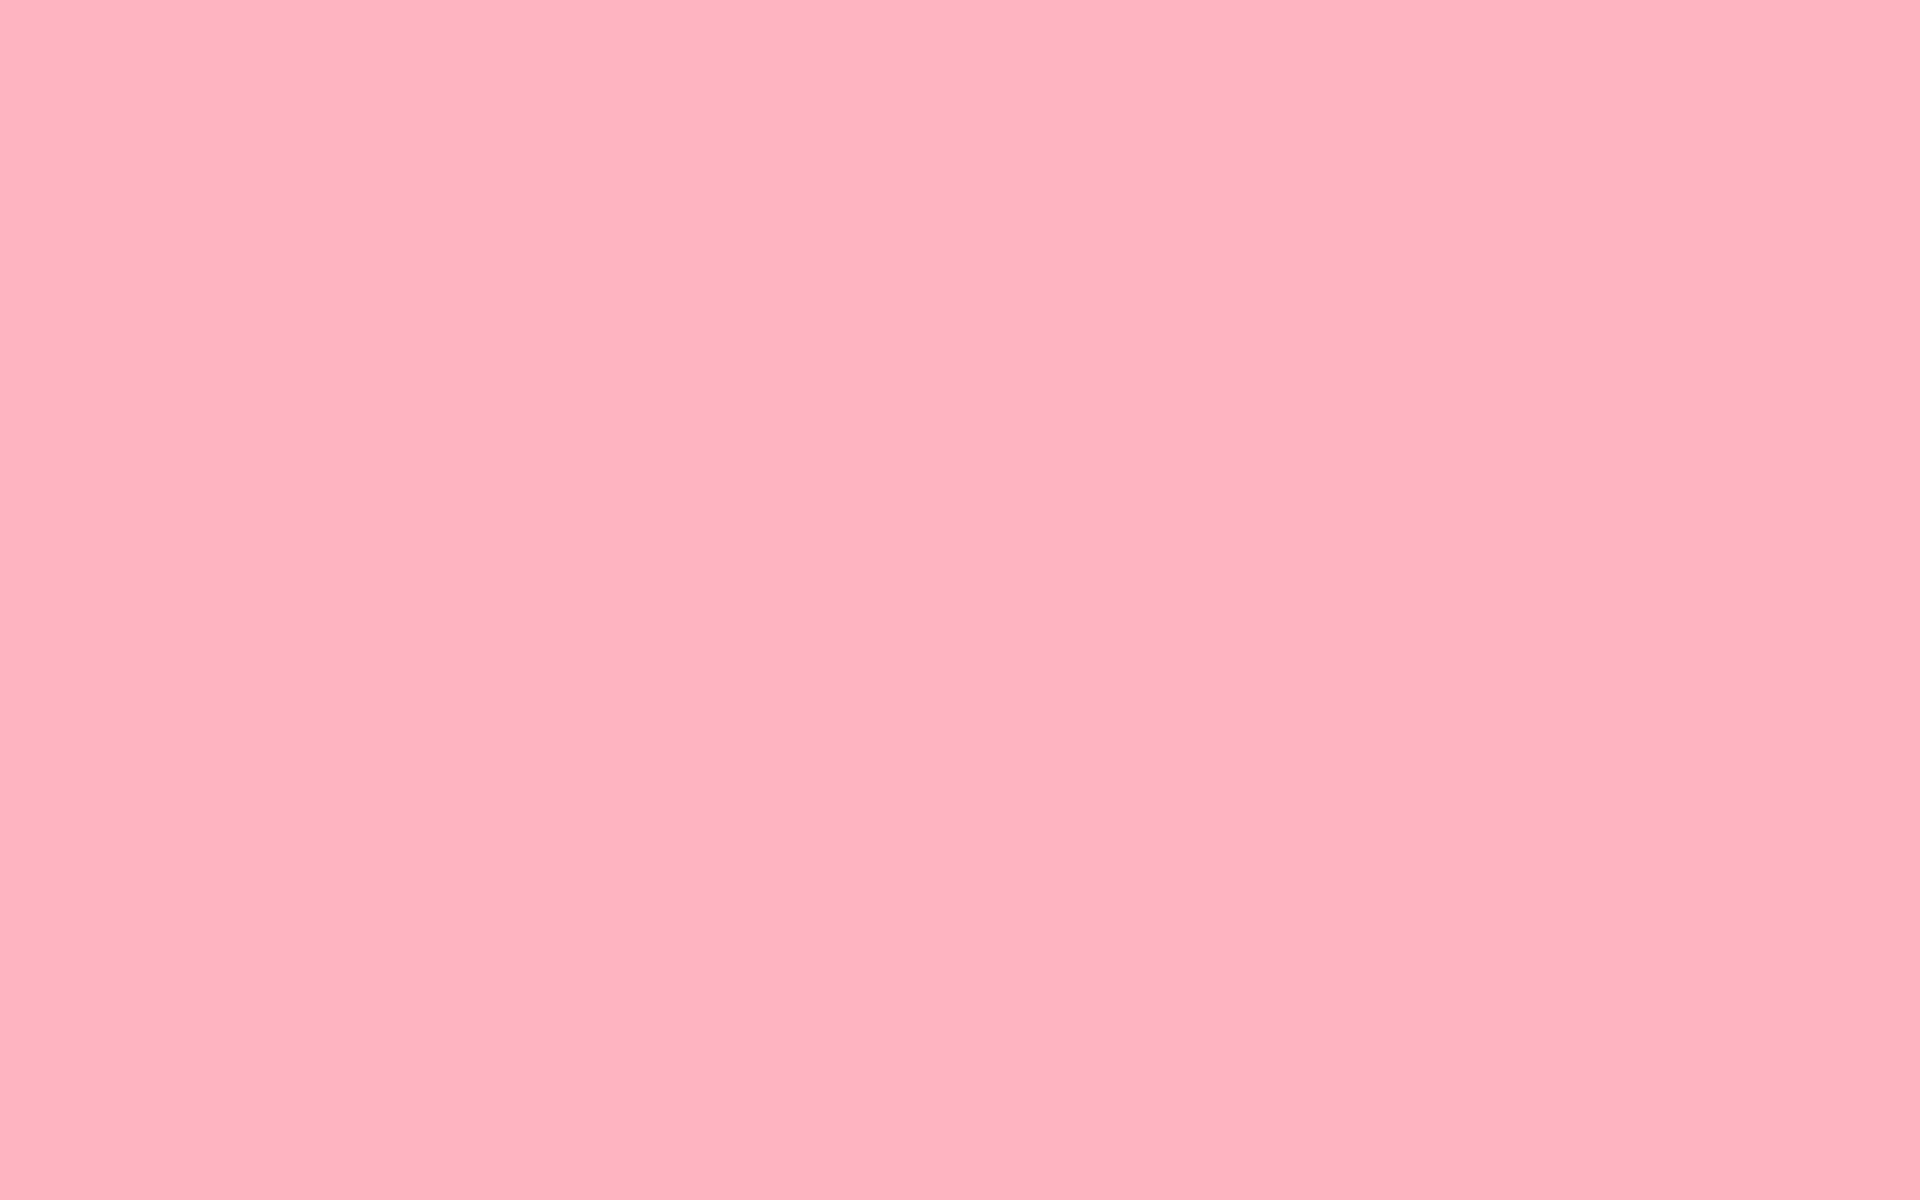 Soft Shades of Pink Background